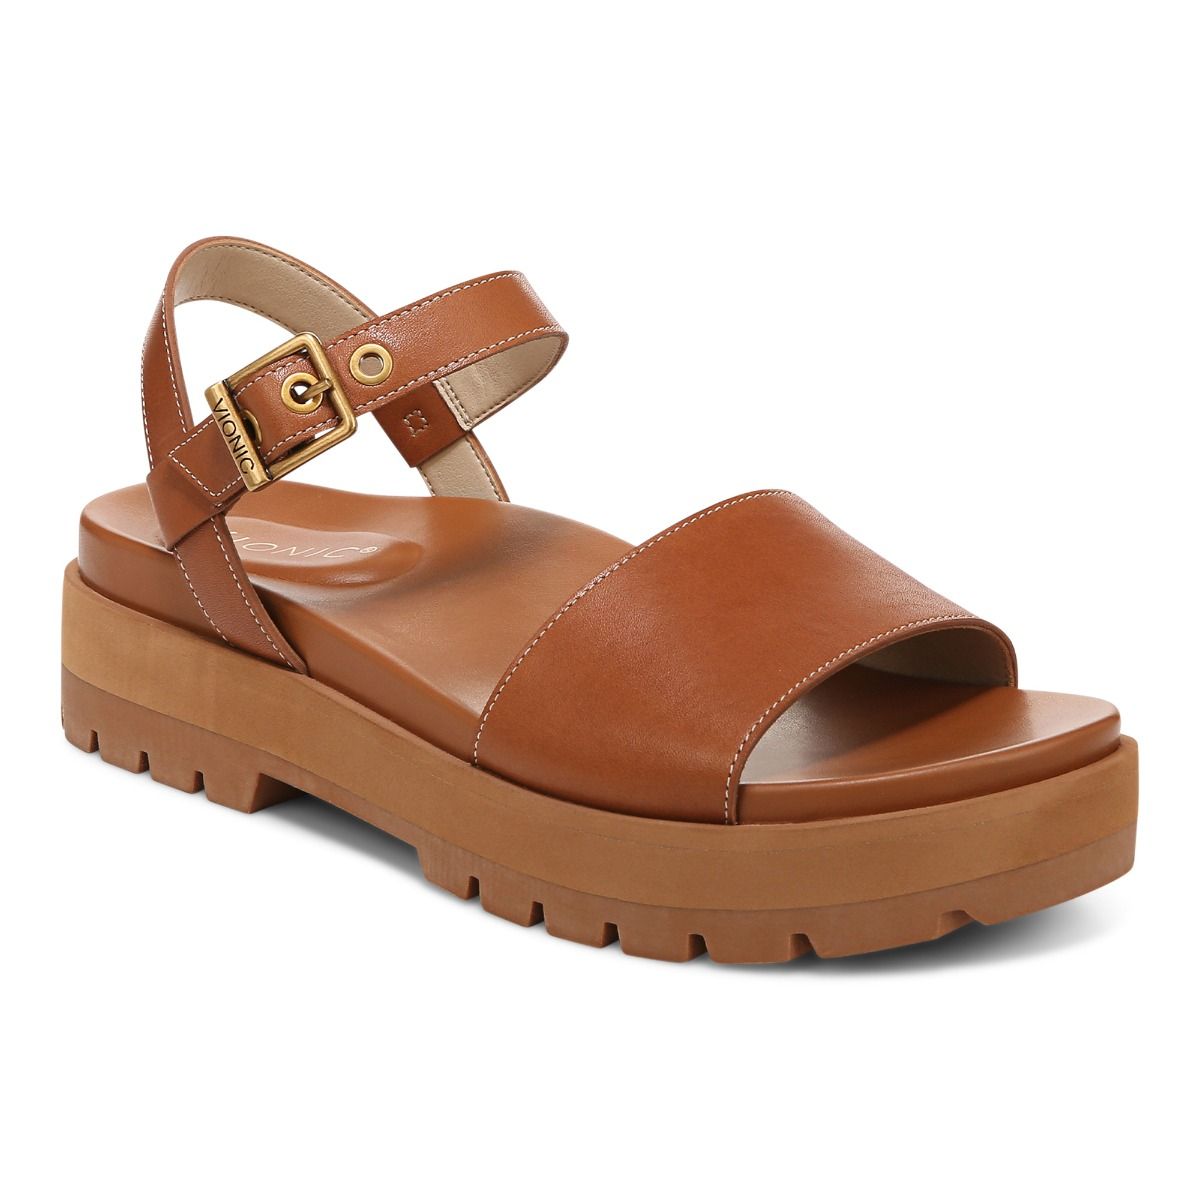 Adjustable Fit Sandal, Wide Foot, Narrow Foot, Light Brown Sandals, Sandals  With Buckle, Women Sandals, Summer Shoes, Leather Sandals 